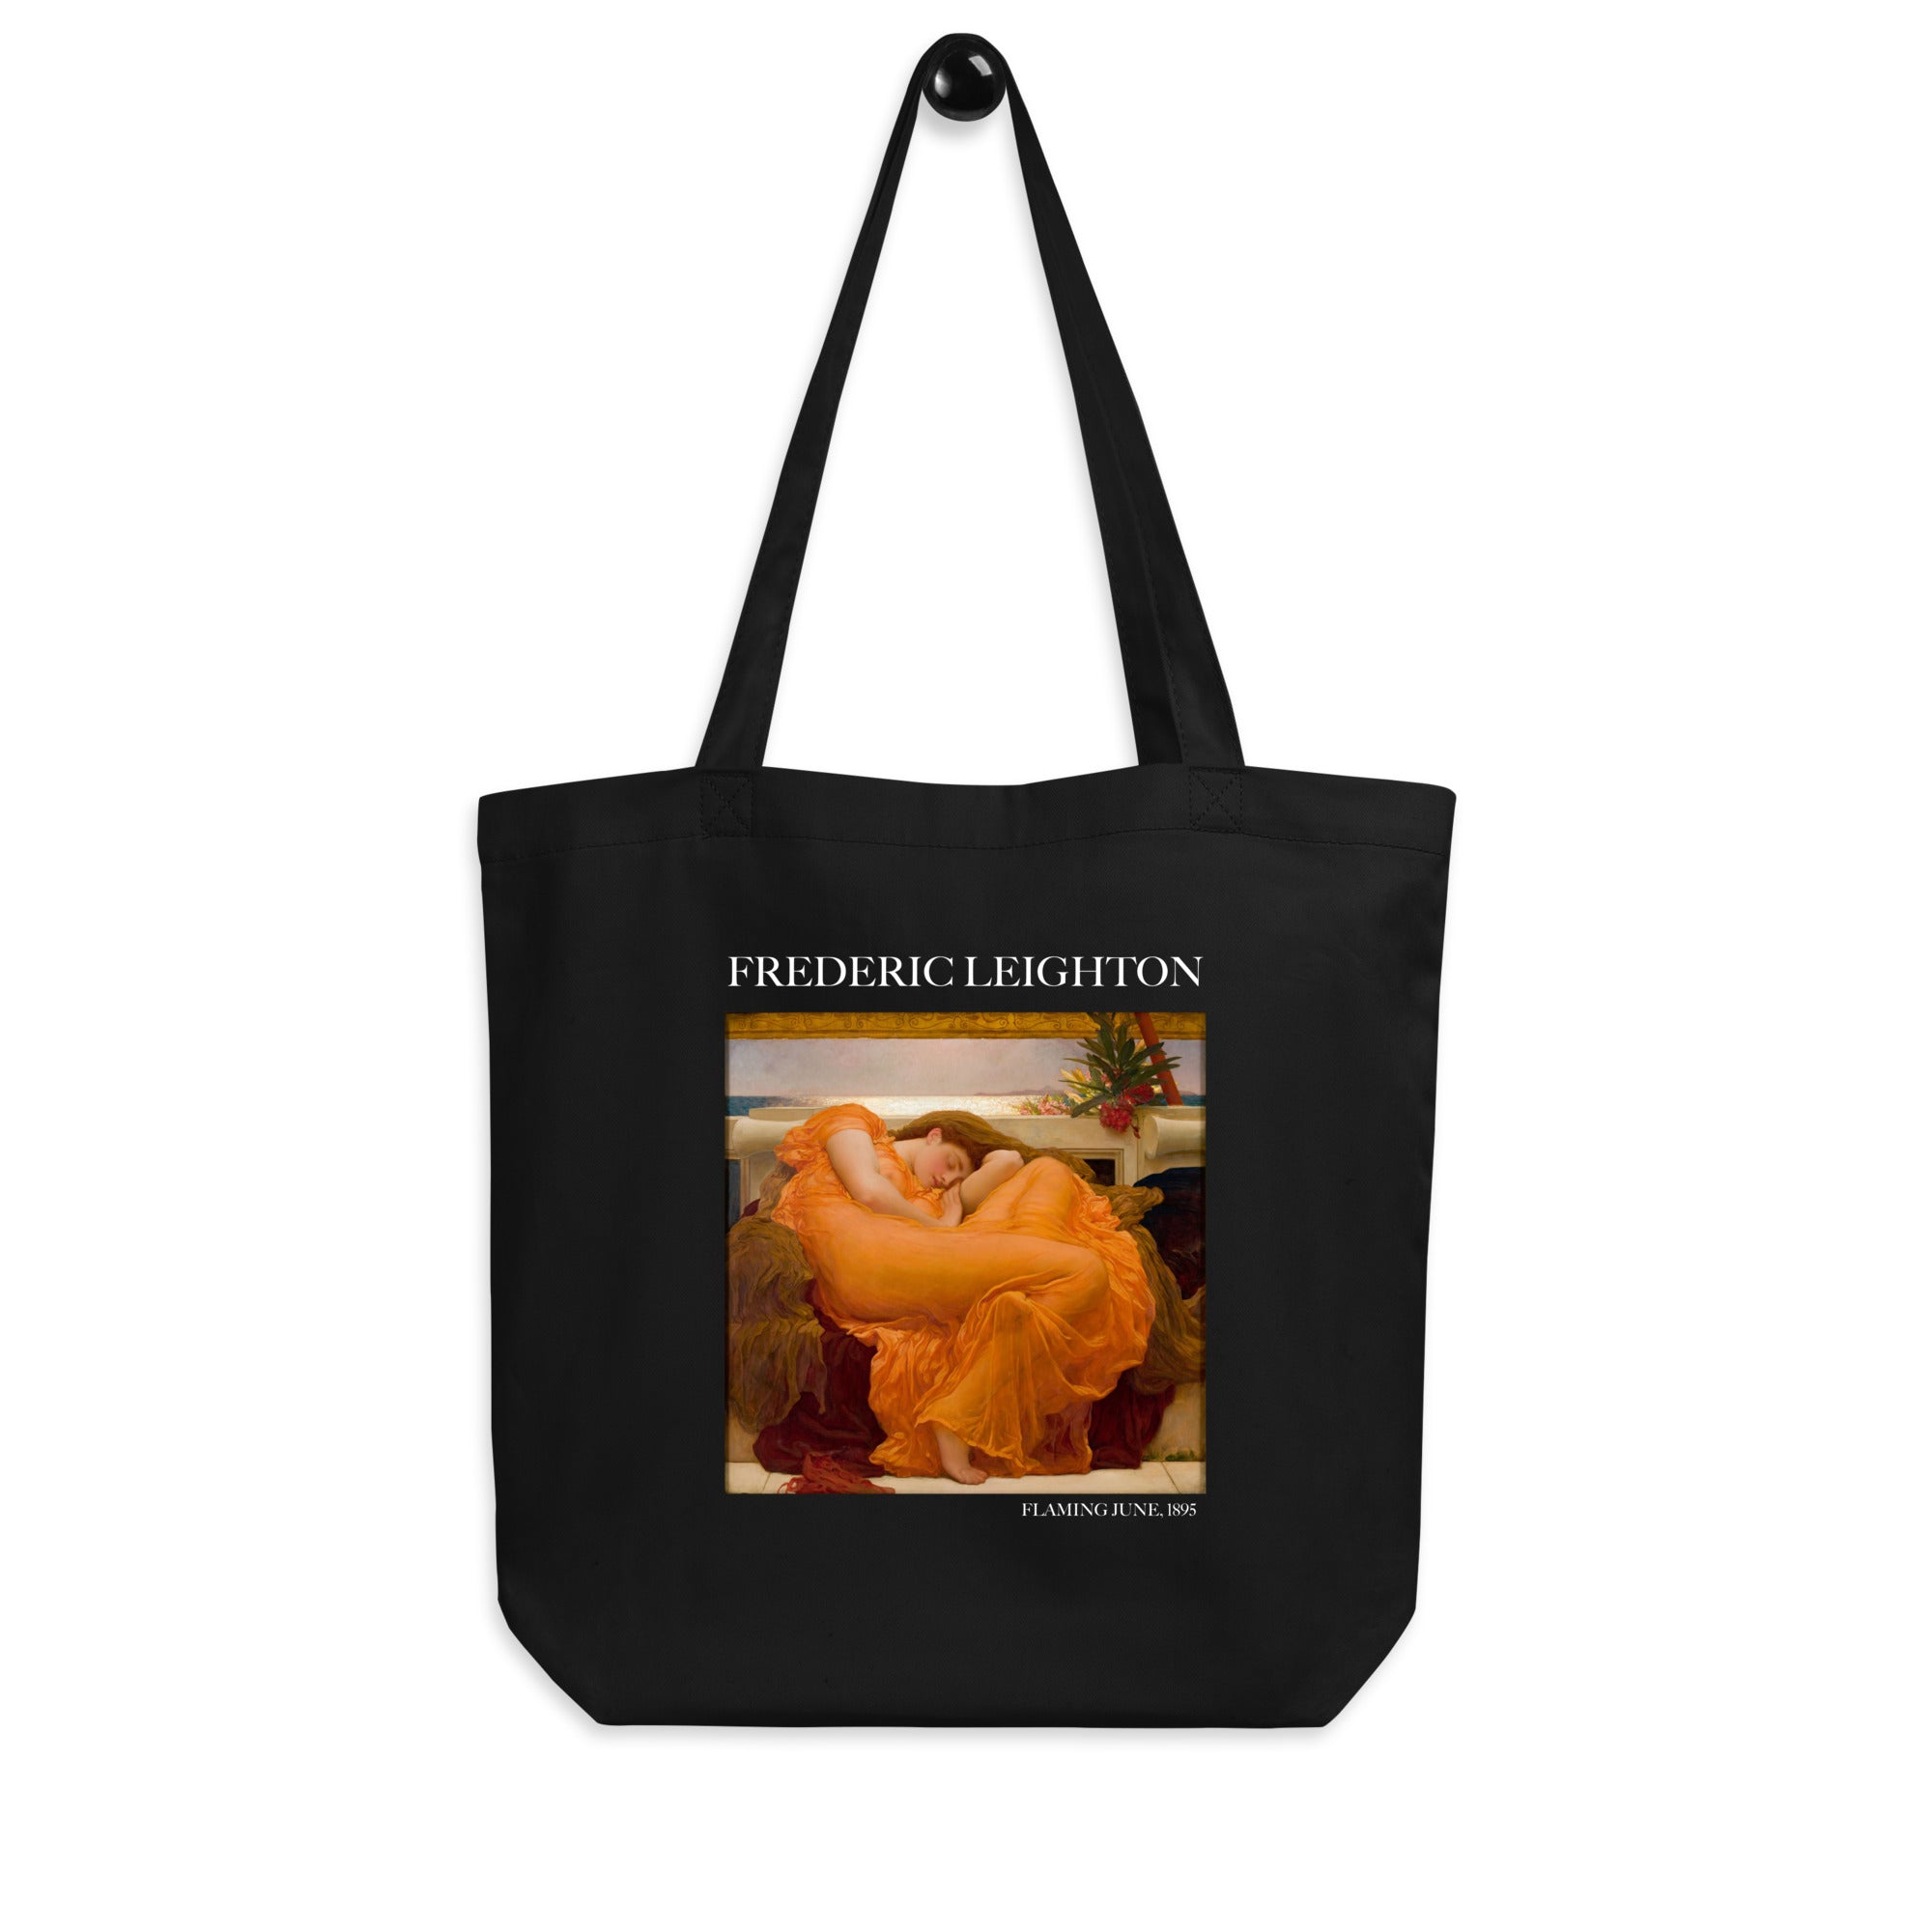 Frederic Leighton 'Flaming June' Famous Painting Totebag | Eco Friendly Art Tote Bag